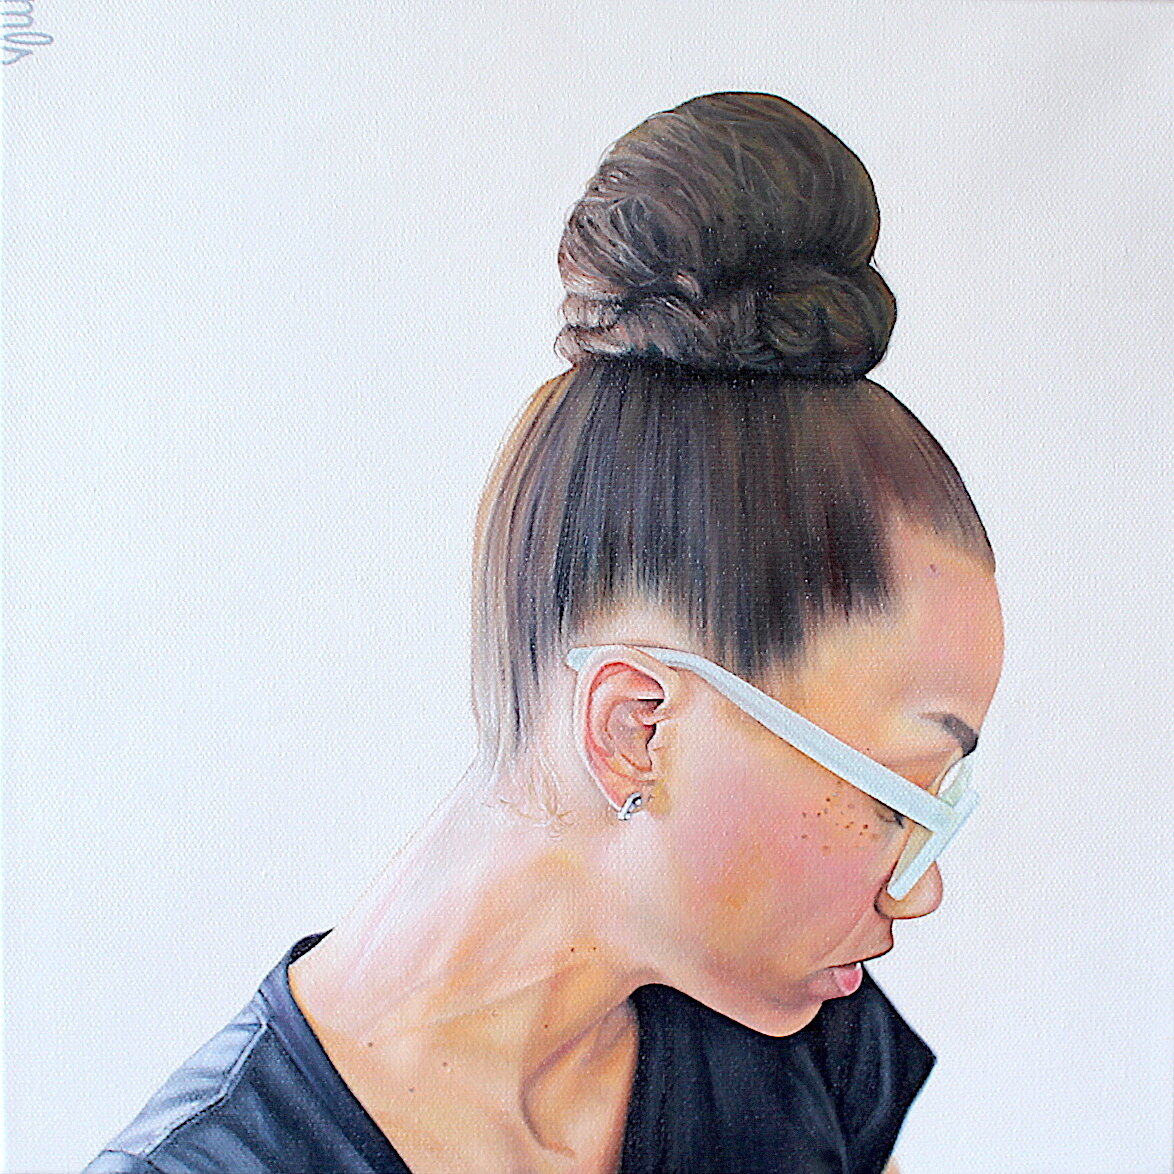  Self-Portrait: Madelyn, oil on canvas, 12″ x 12,” 2020 (SOLD). 